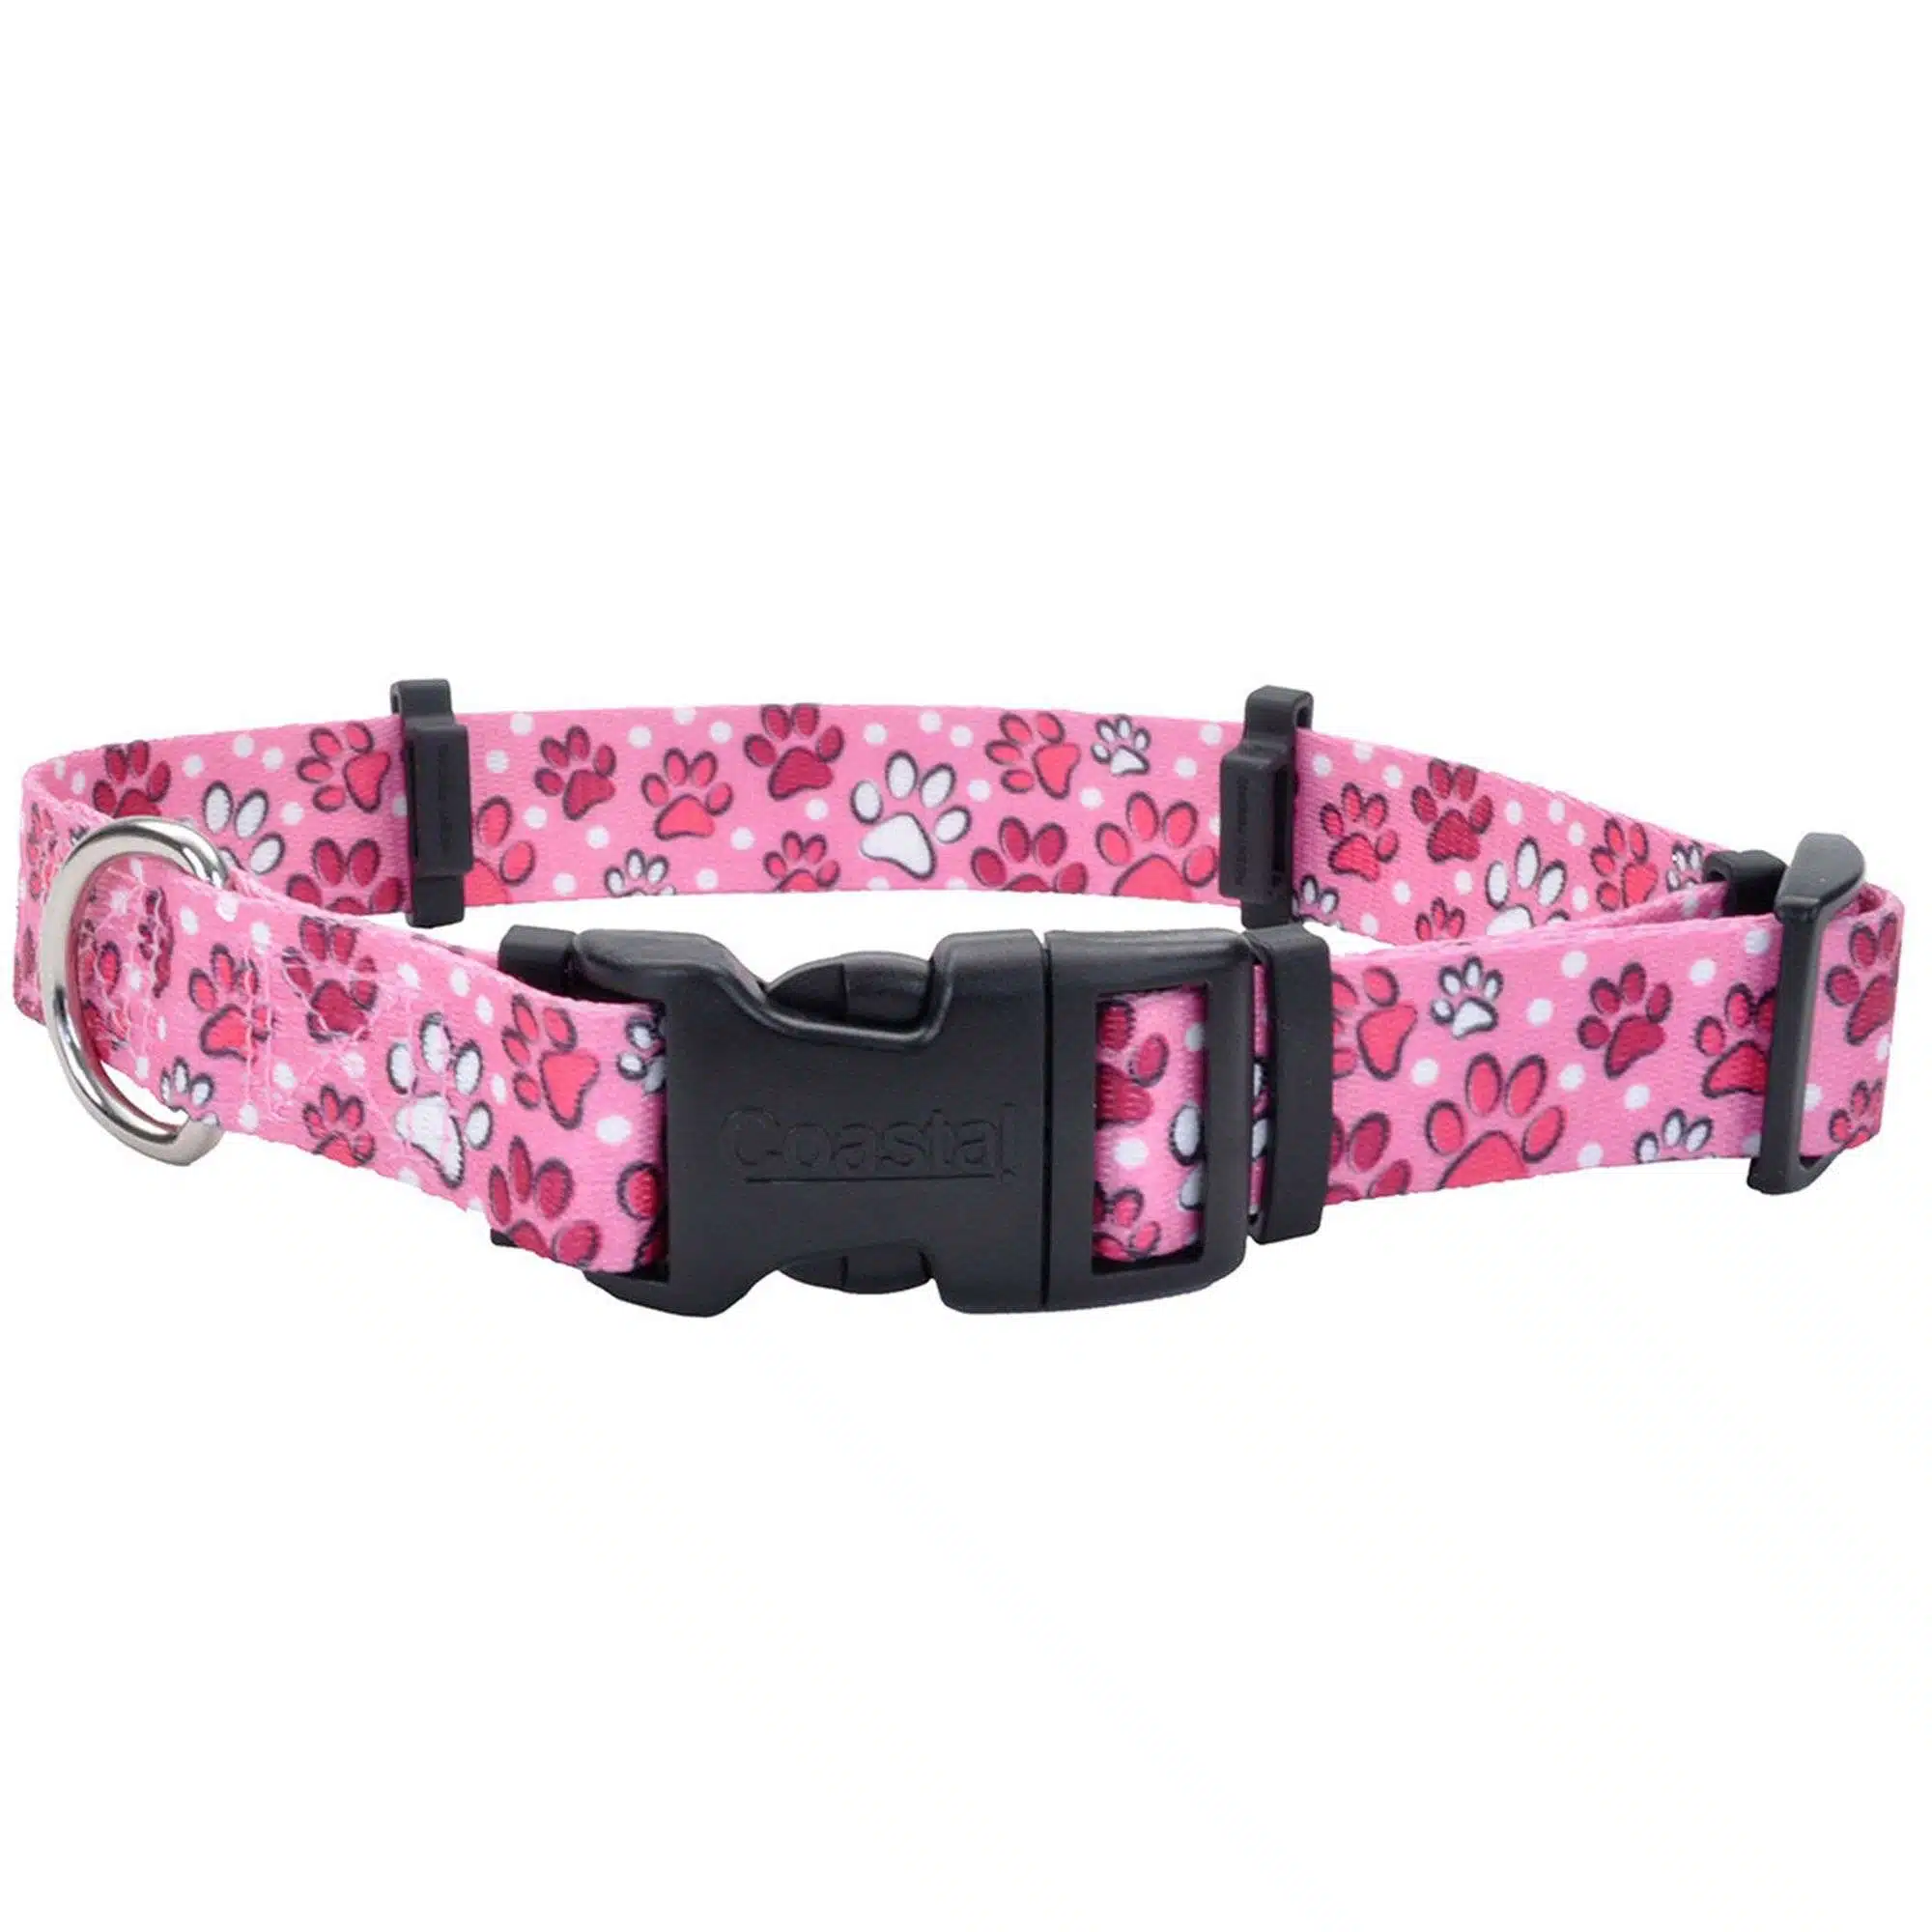 Coastal Pet Products Secure Away Adjustable Flea and Tick Collar Protector in Pink Paws, Size: 14"L x 1"W | PetSmart